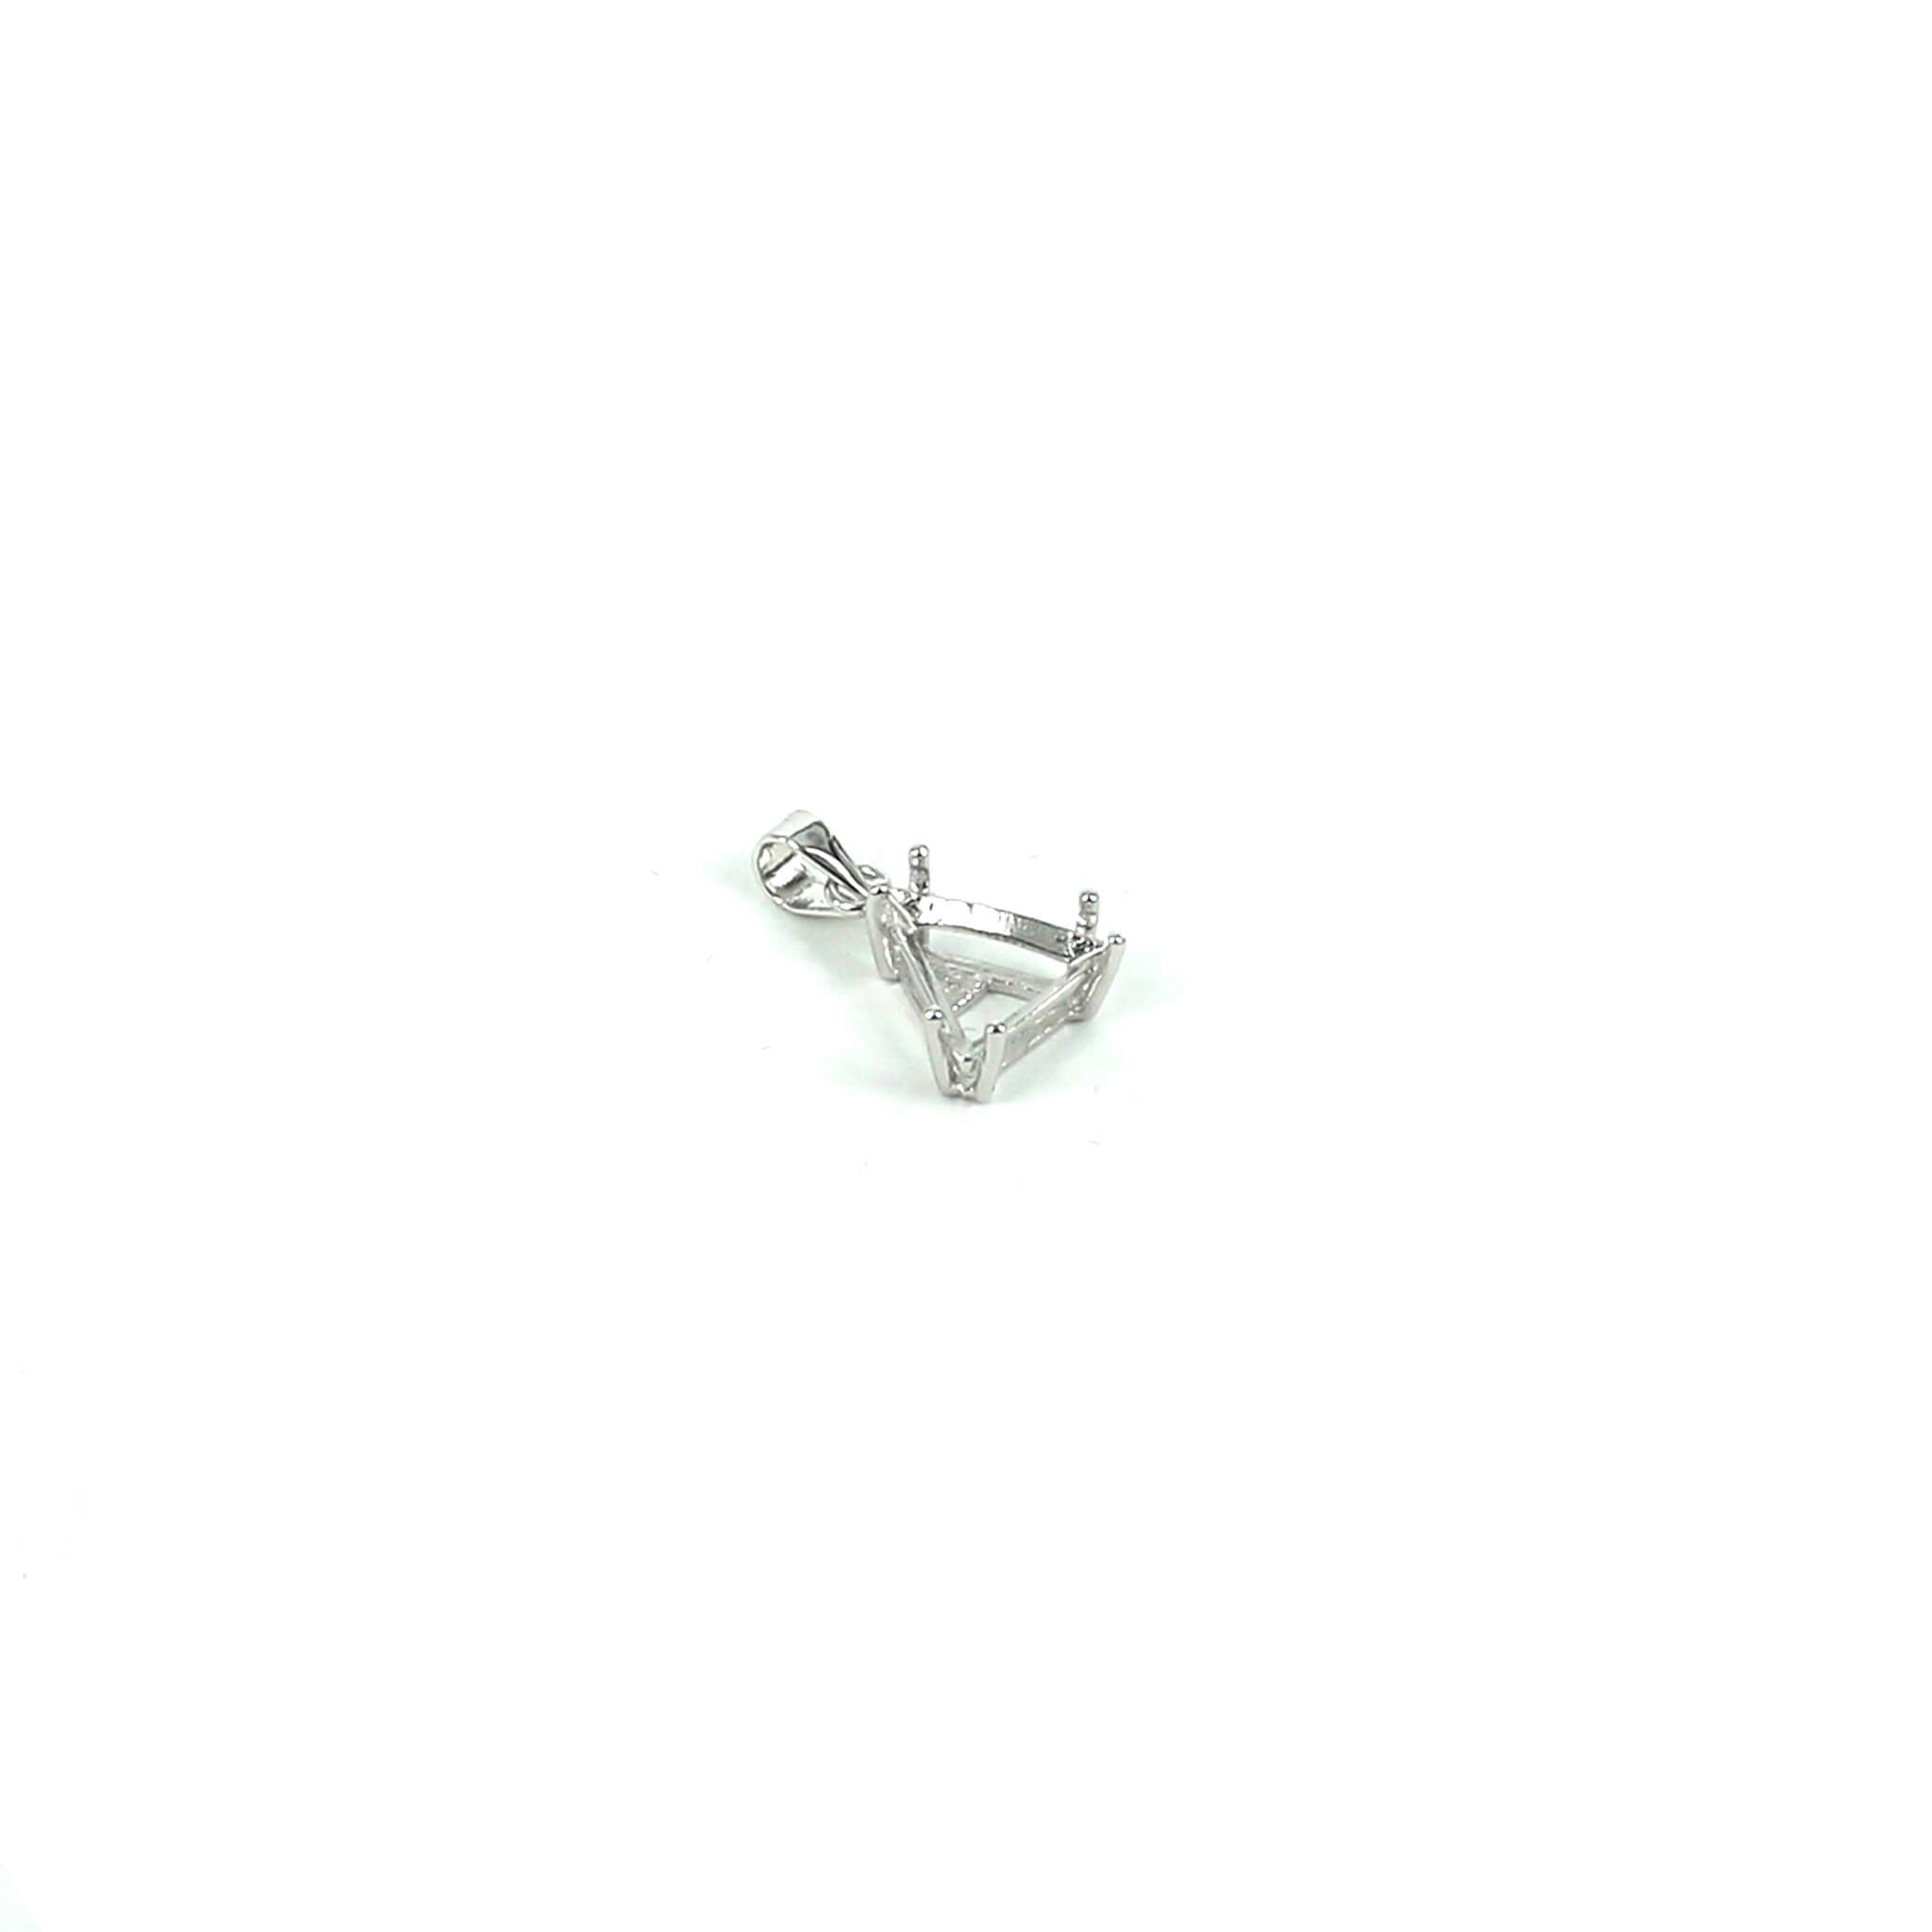 Triangular Pendant with Triangular Shape Mounting and Bail in Sterling Silver 9x9mm